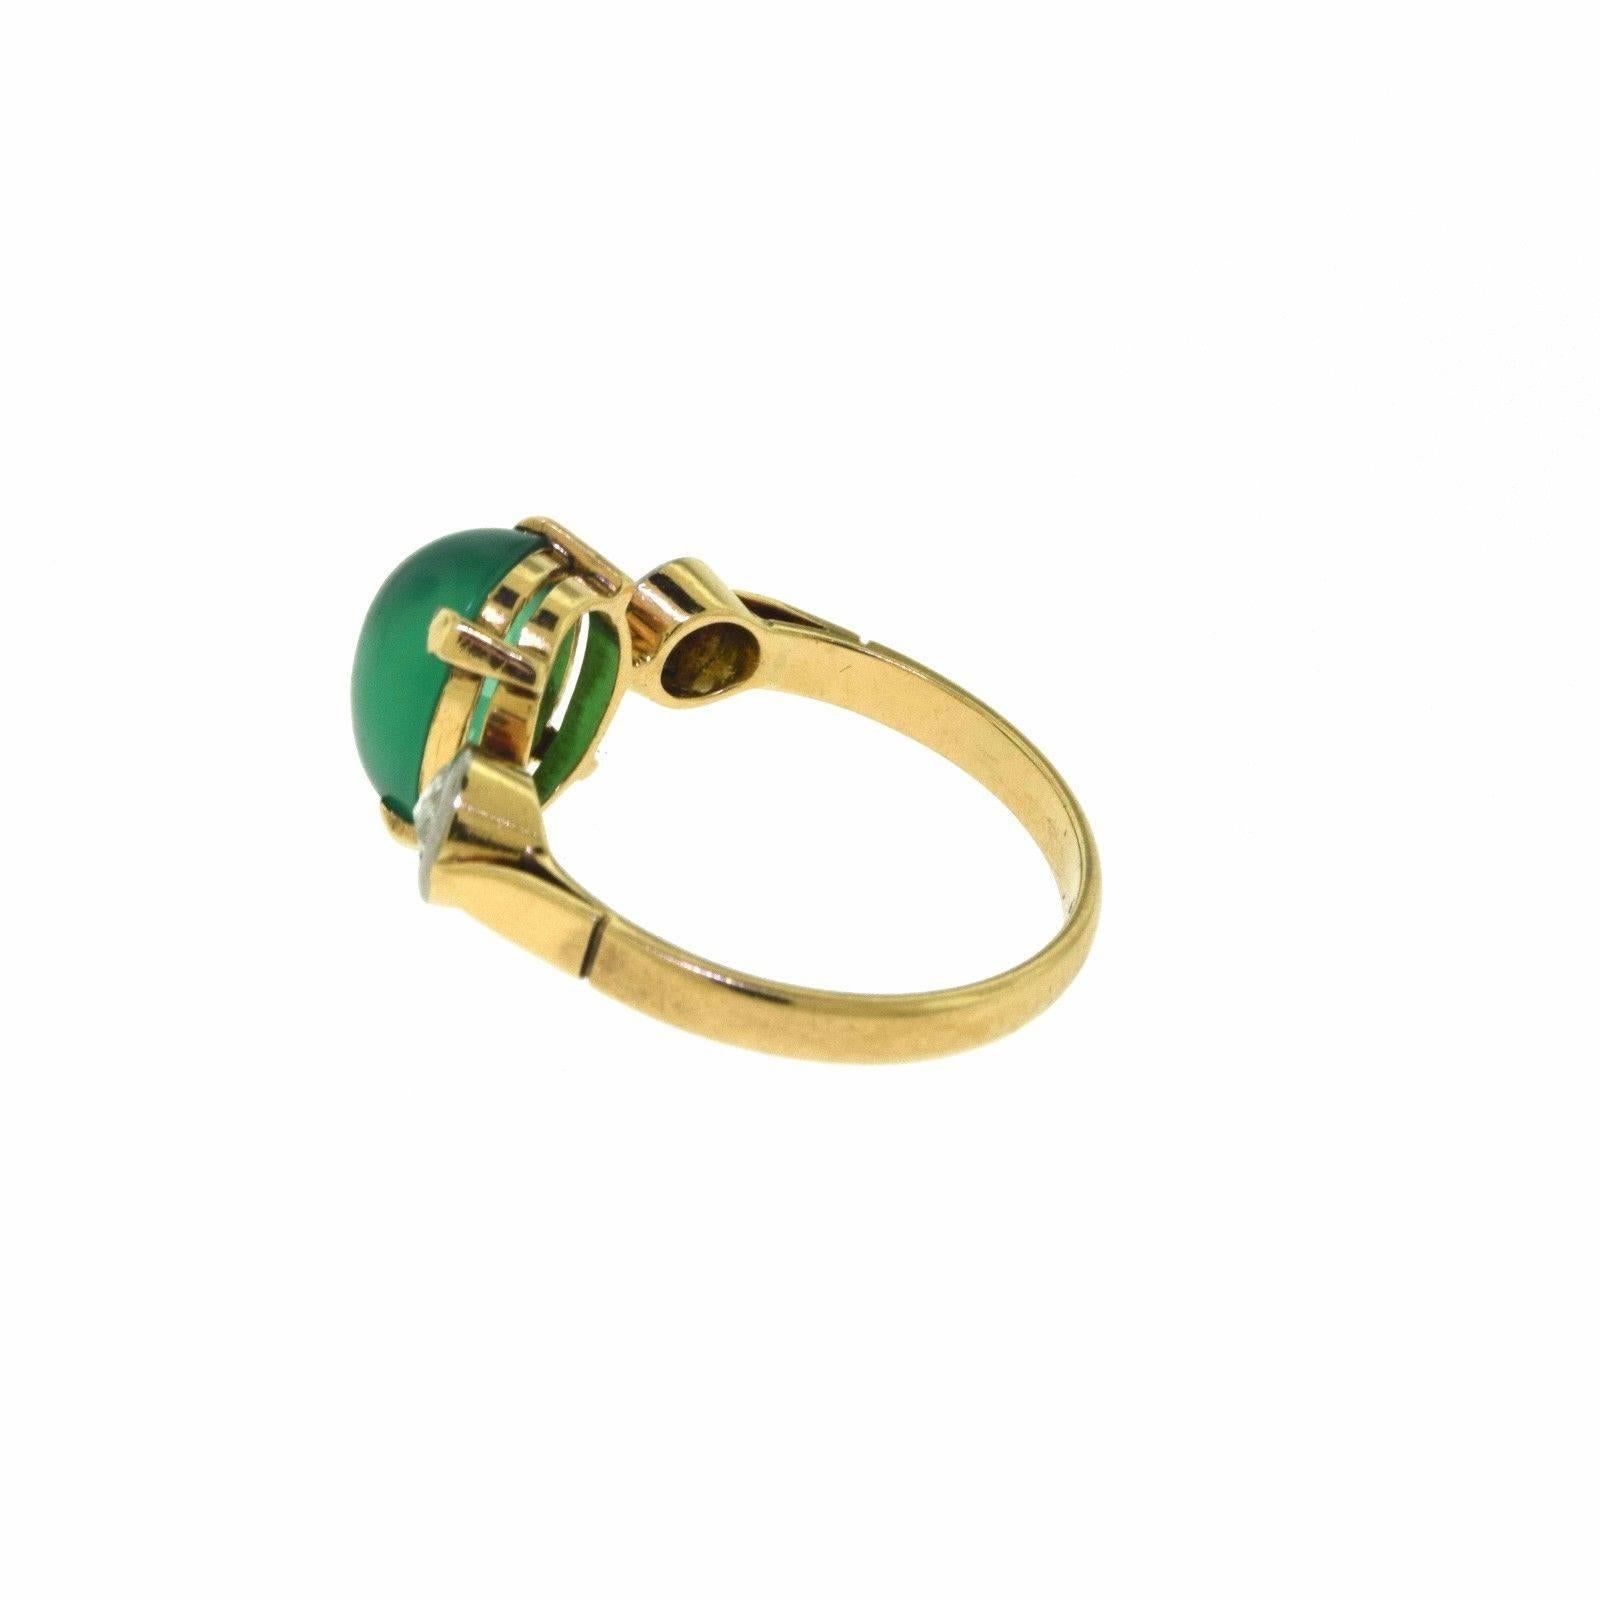 This is a magnificent rose cut diamond and cabochon chrysoprase estate ring set in 14k yellow gold and is the result of a beautifully intricate work of art with a precious story to tell the world. This makes a fabulous gift for that special